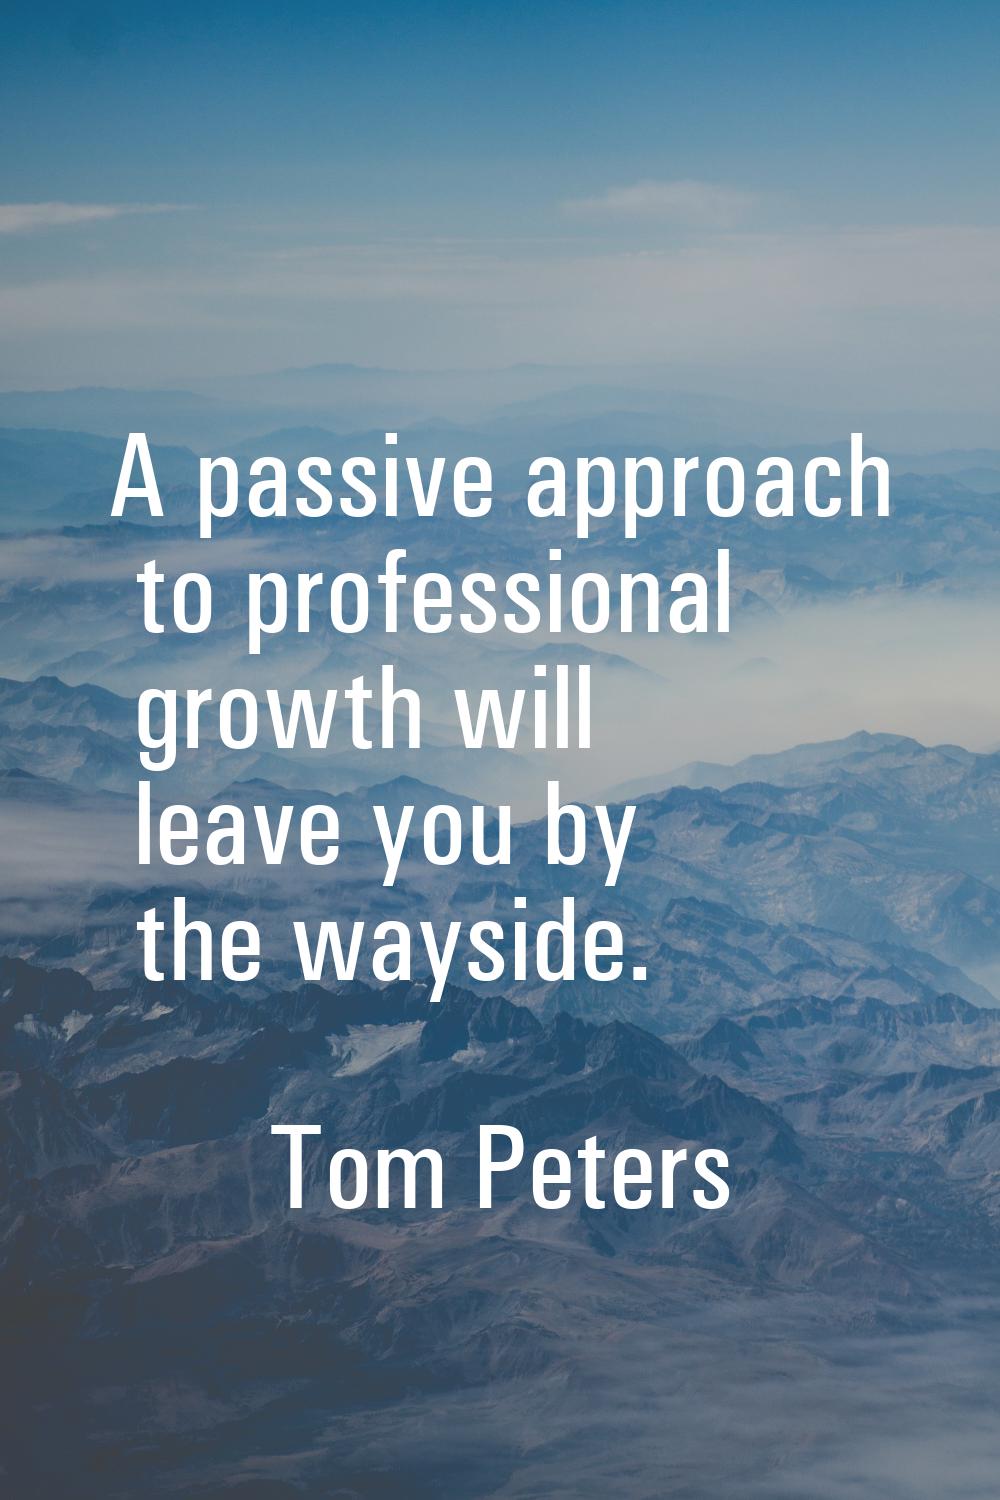 A passive approach to professional growth will leave you by the wayside.